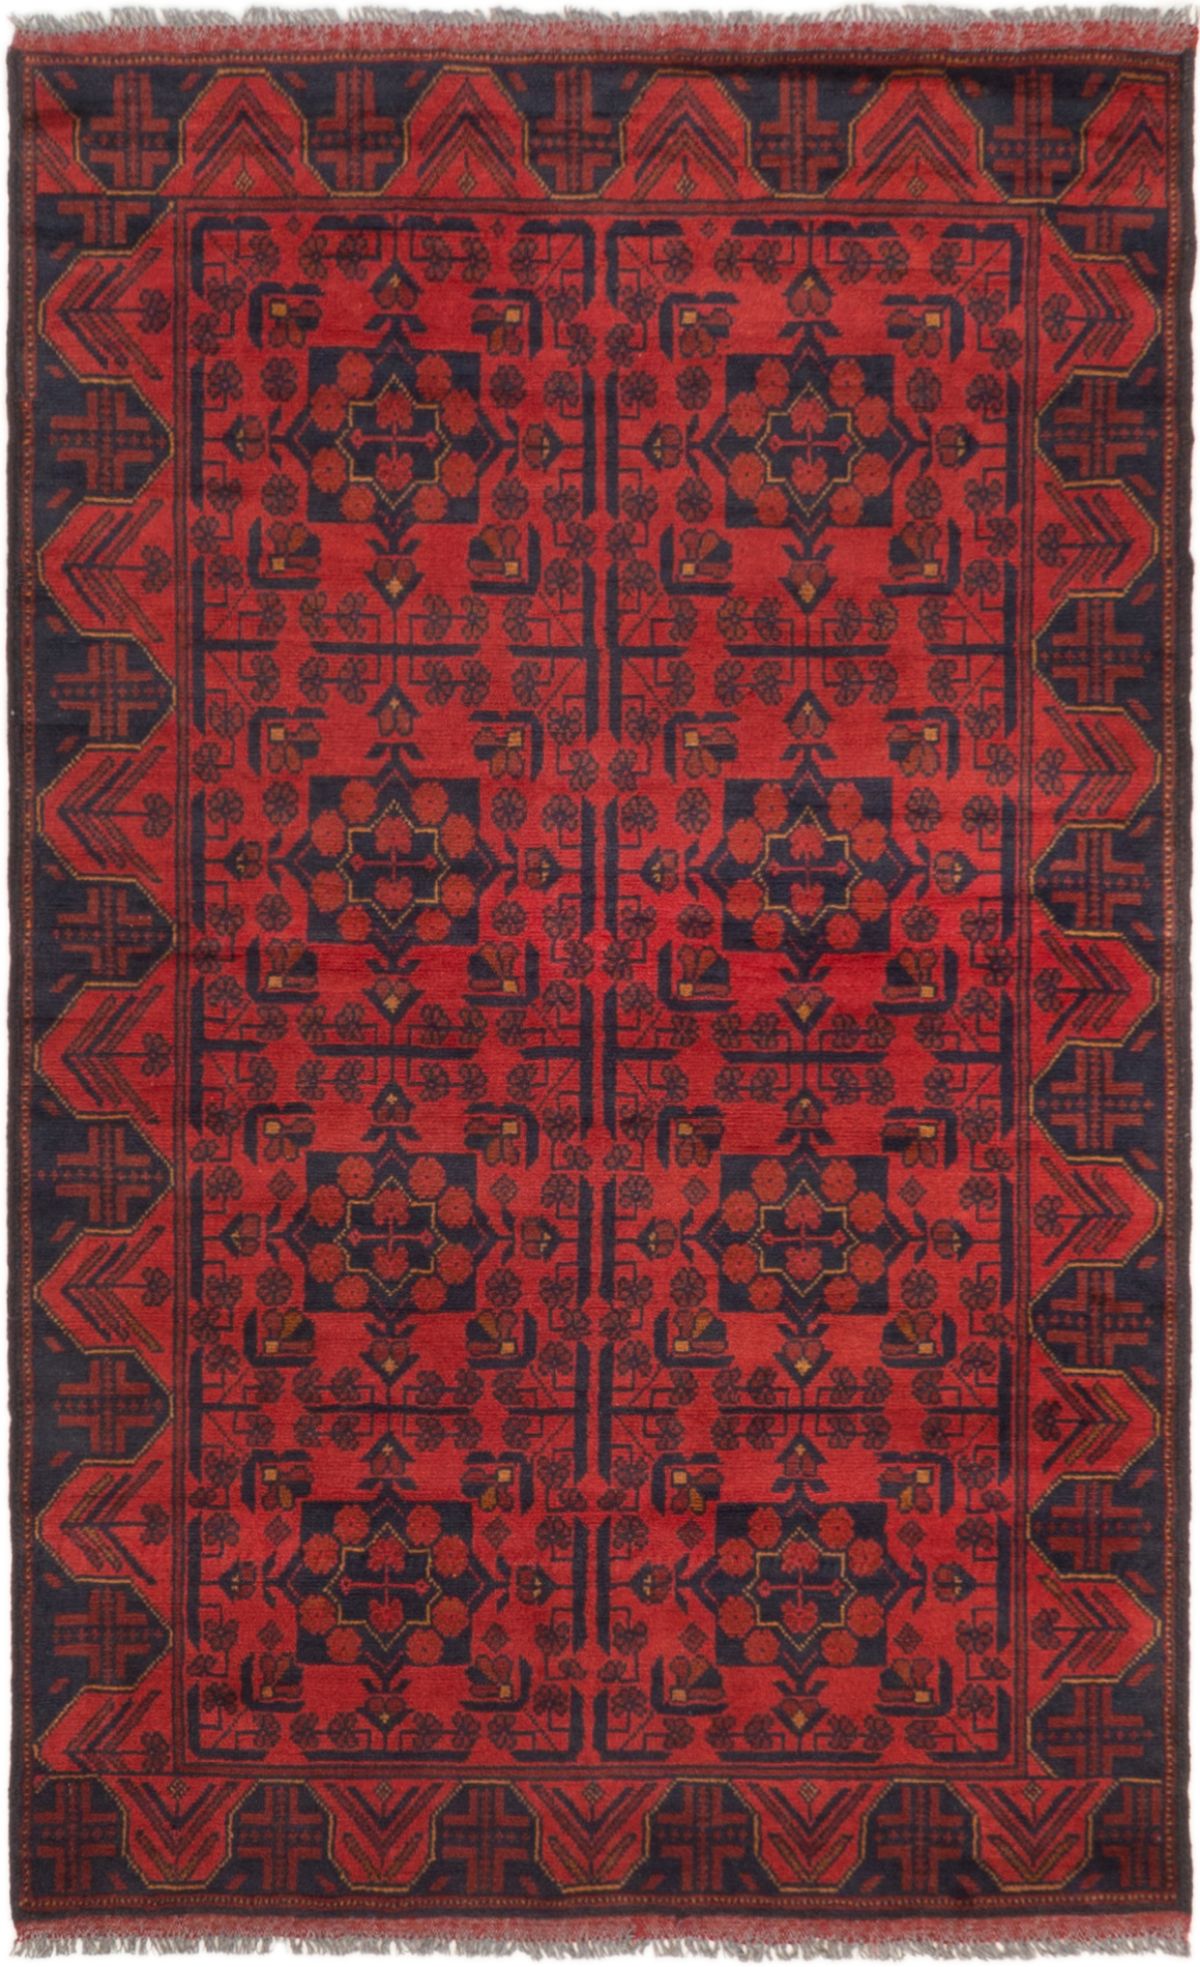 Hand-knotted Finest Khal Mohammadi Dark Red Wool Rug 3'11" x 6'3"  Size: 3'11" x 6'3"  